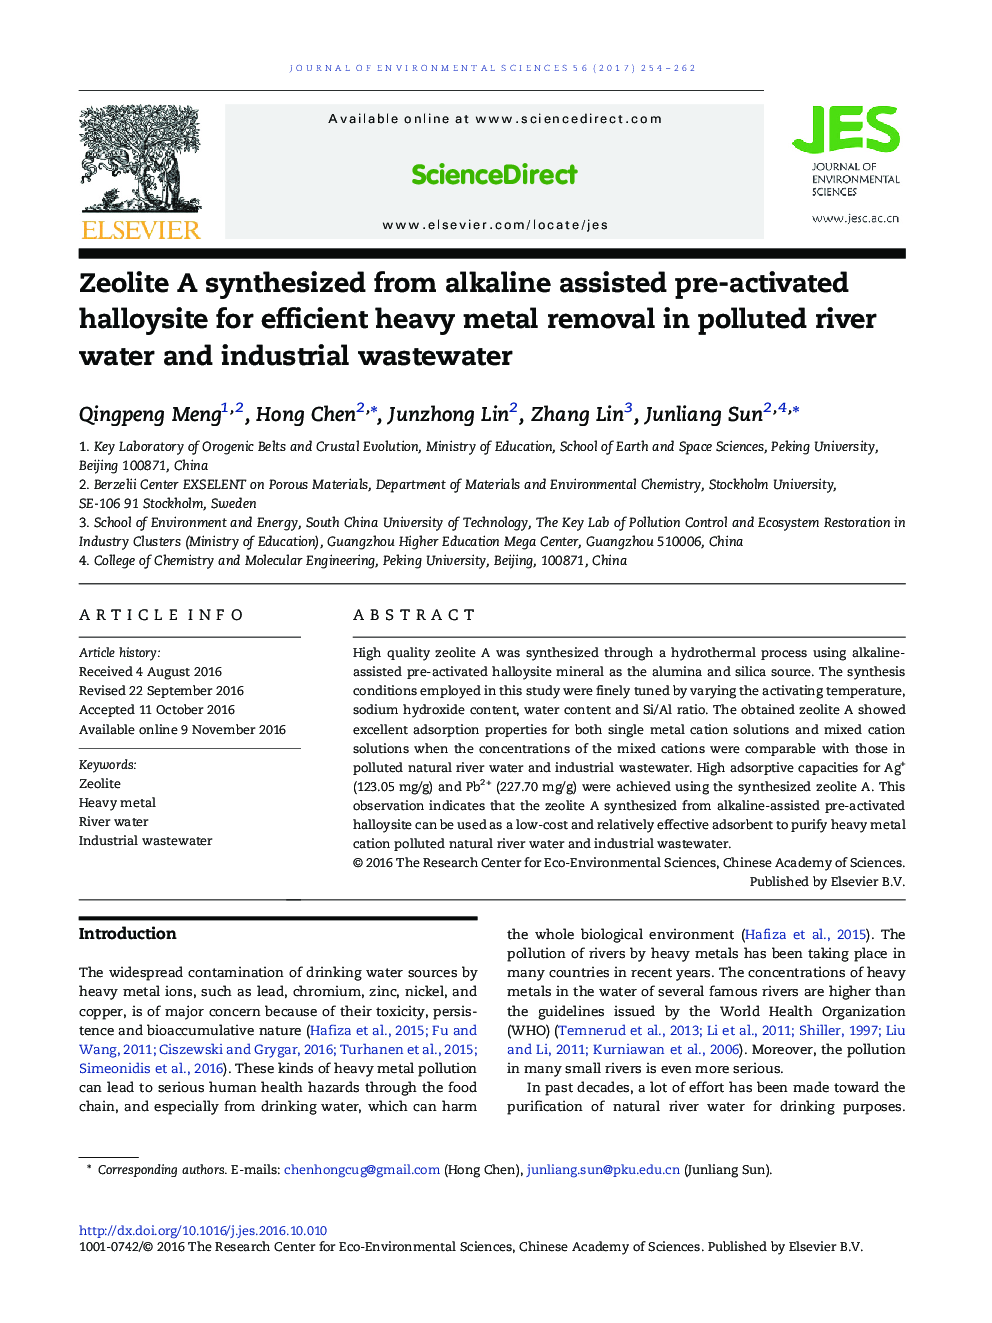 Zeolite A synthesized from alkaline assisted pre-activated halloysite for efficient heavy metal removal in polluted river water and industrial wastewater